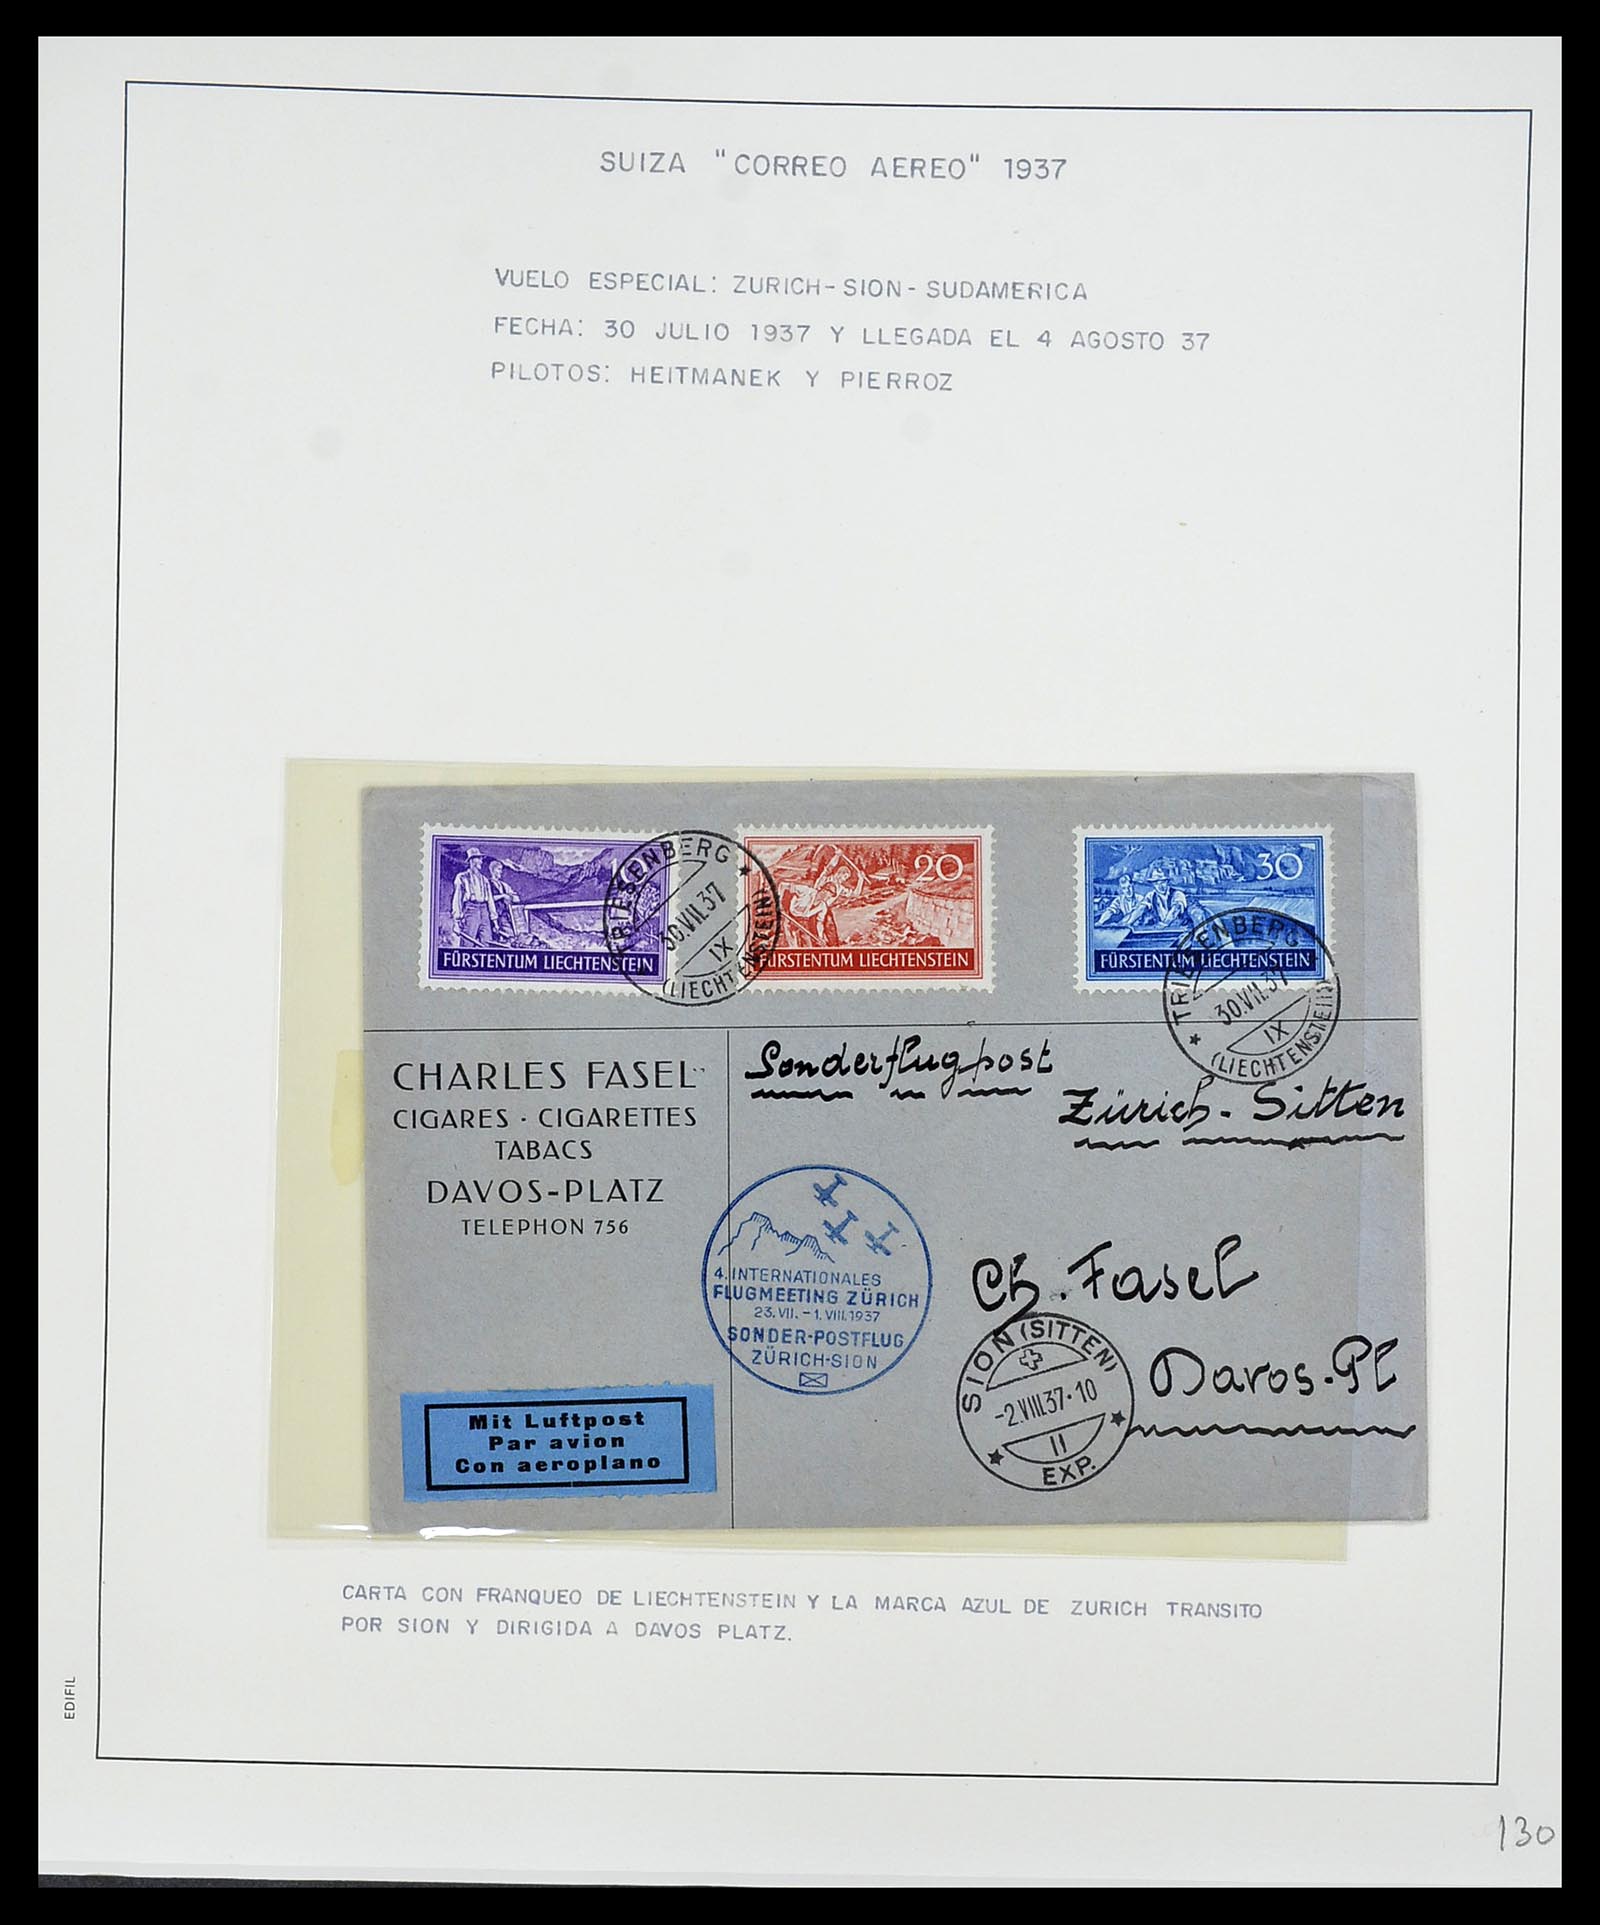 34137 068 - Stamp collection 34137 Switzerland airmail covers 1923-1963.